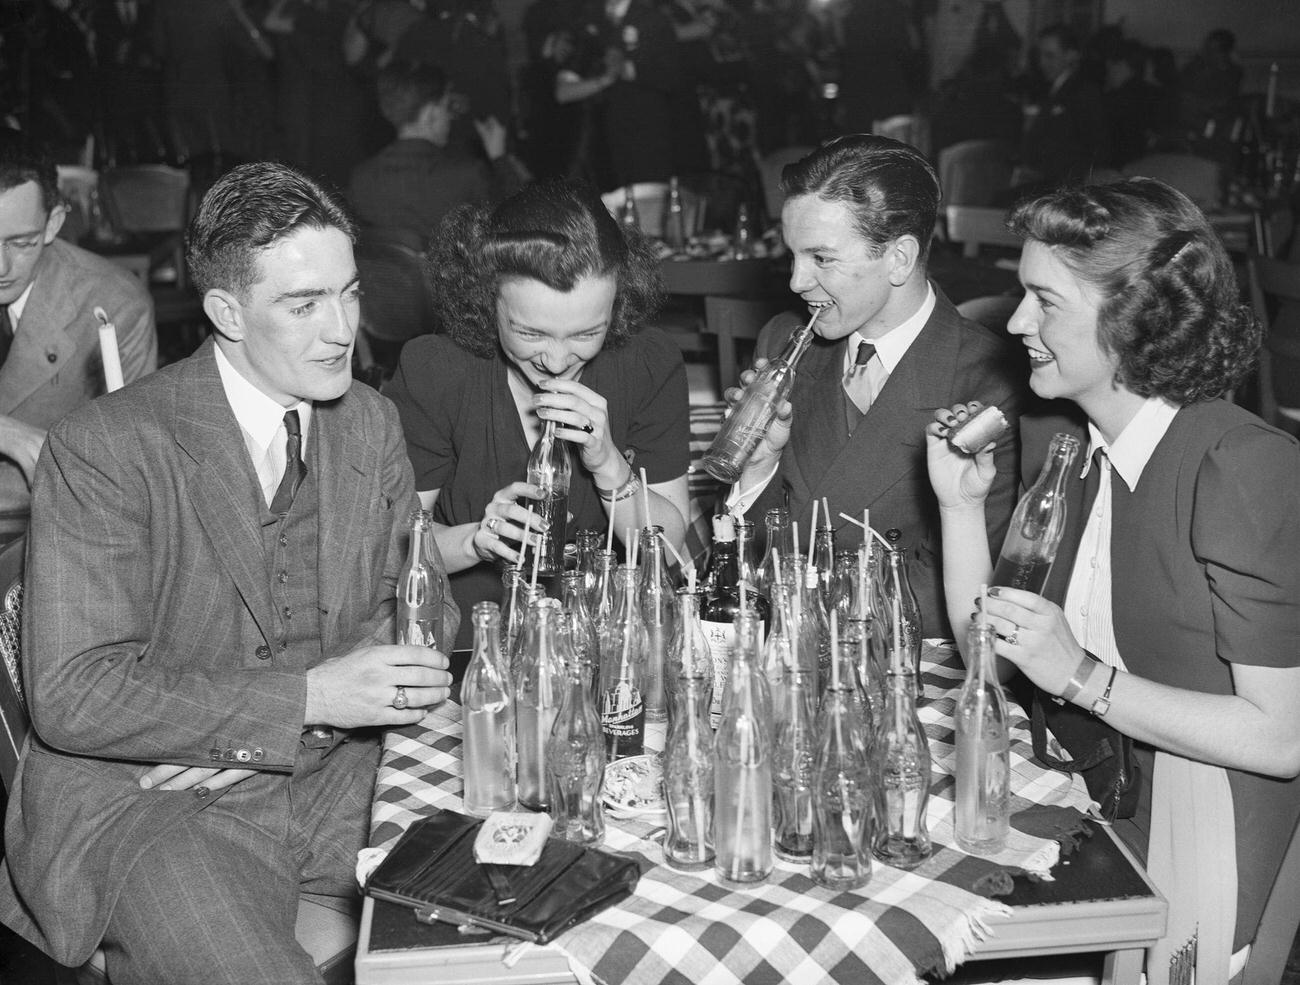 Convivial scene with Coca-Cola bottles at Pop and Ernie's club, April 6, 1938.